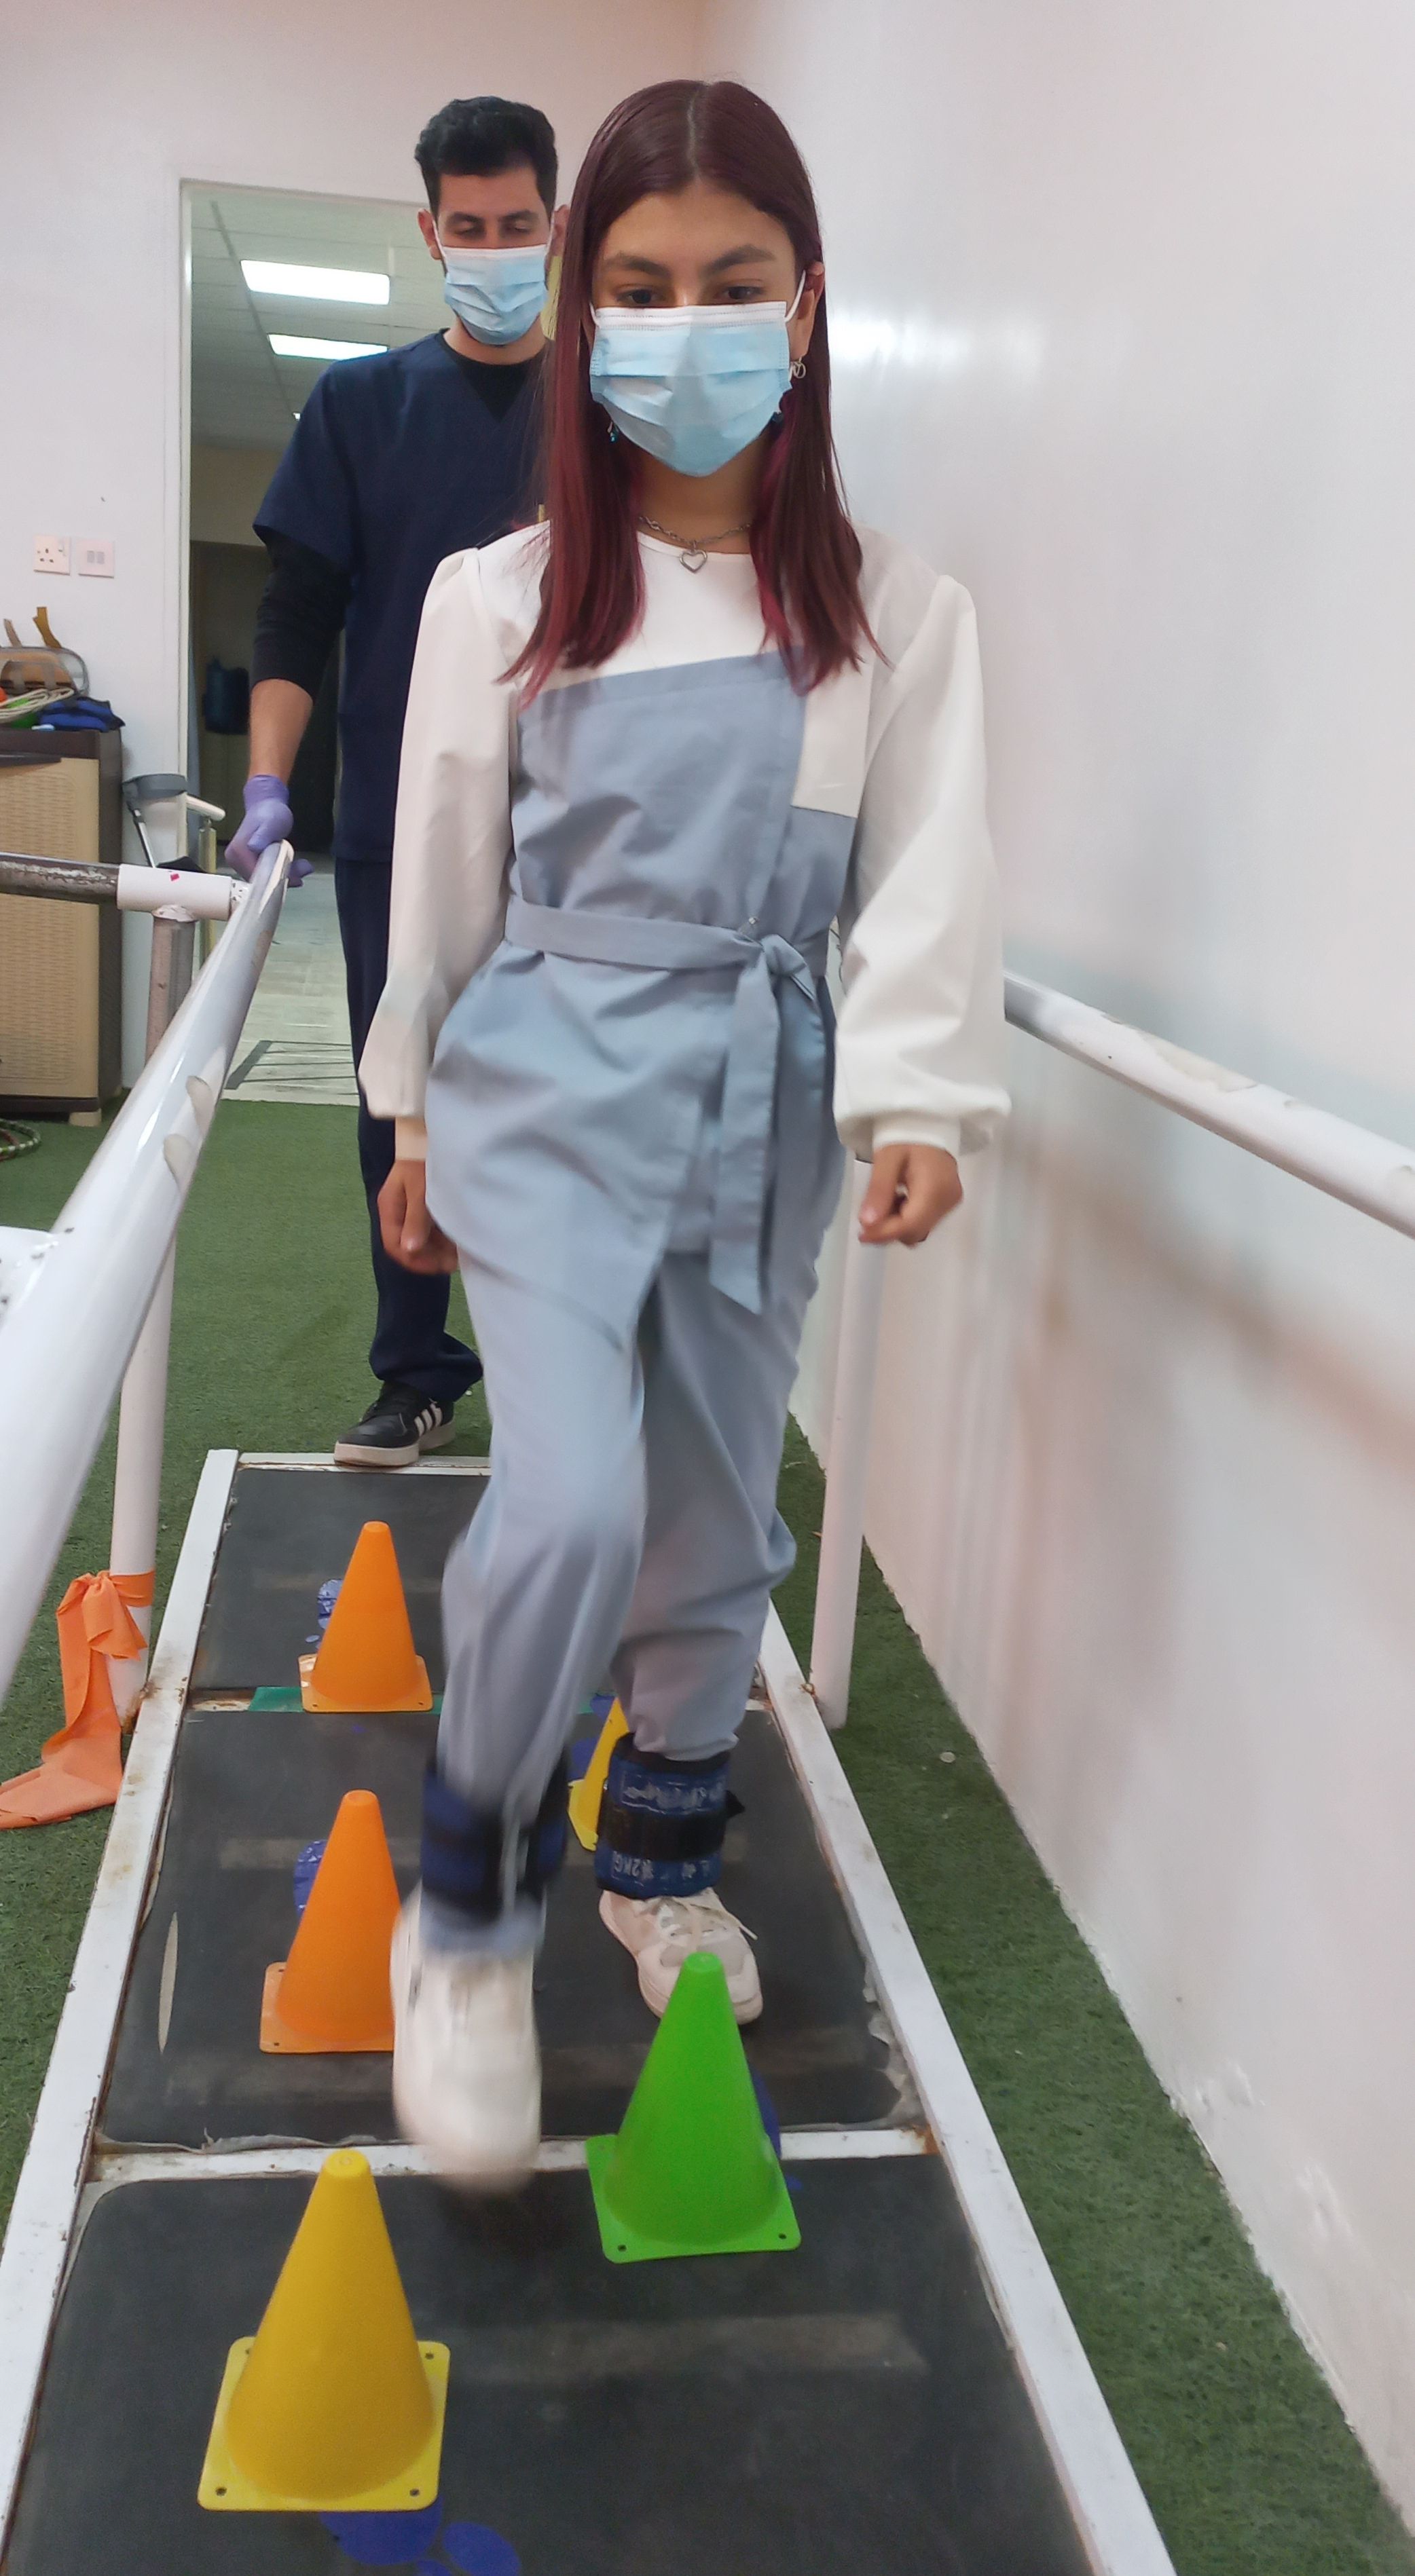 Gina during a rehabilitation session, performing an obstacle course exercise.